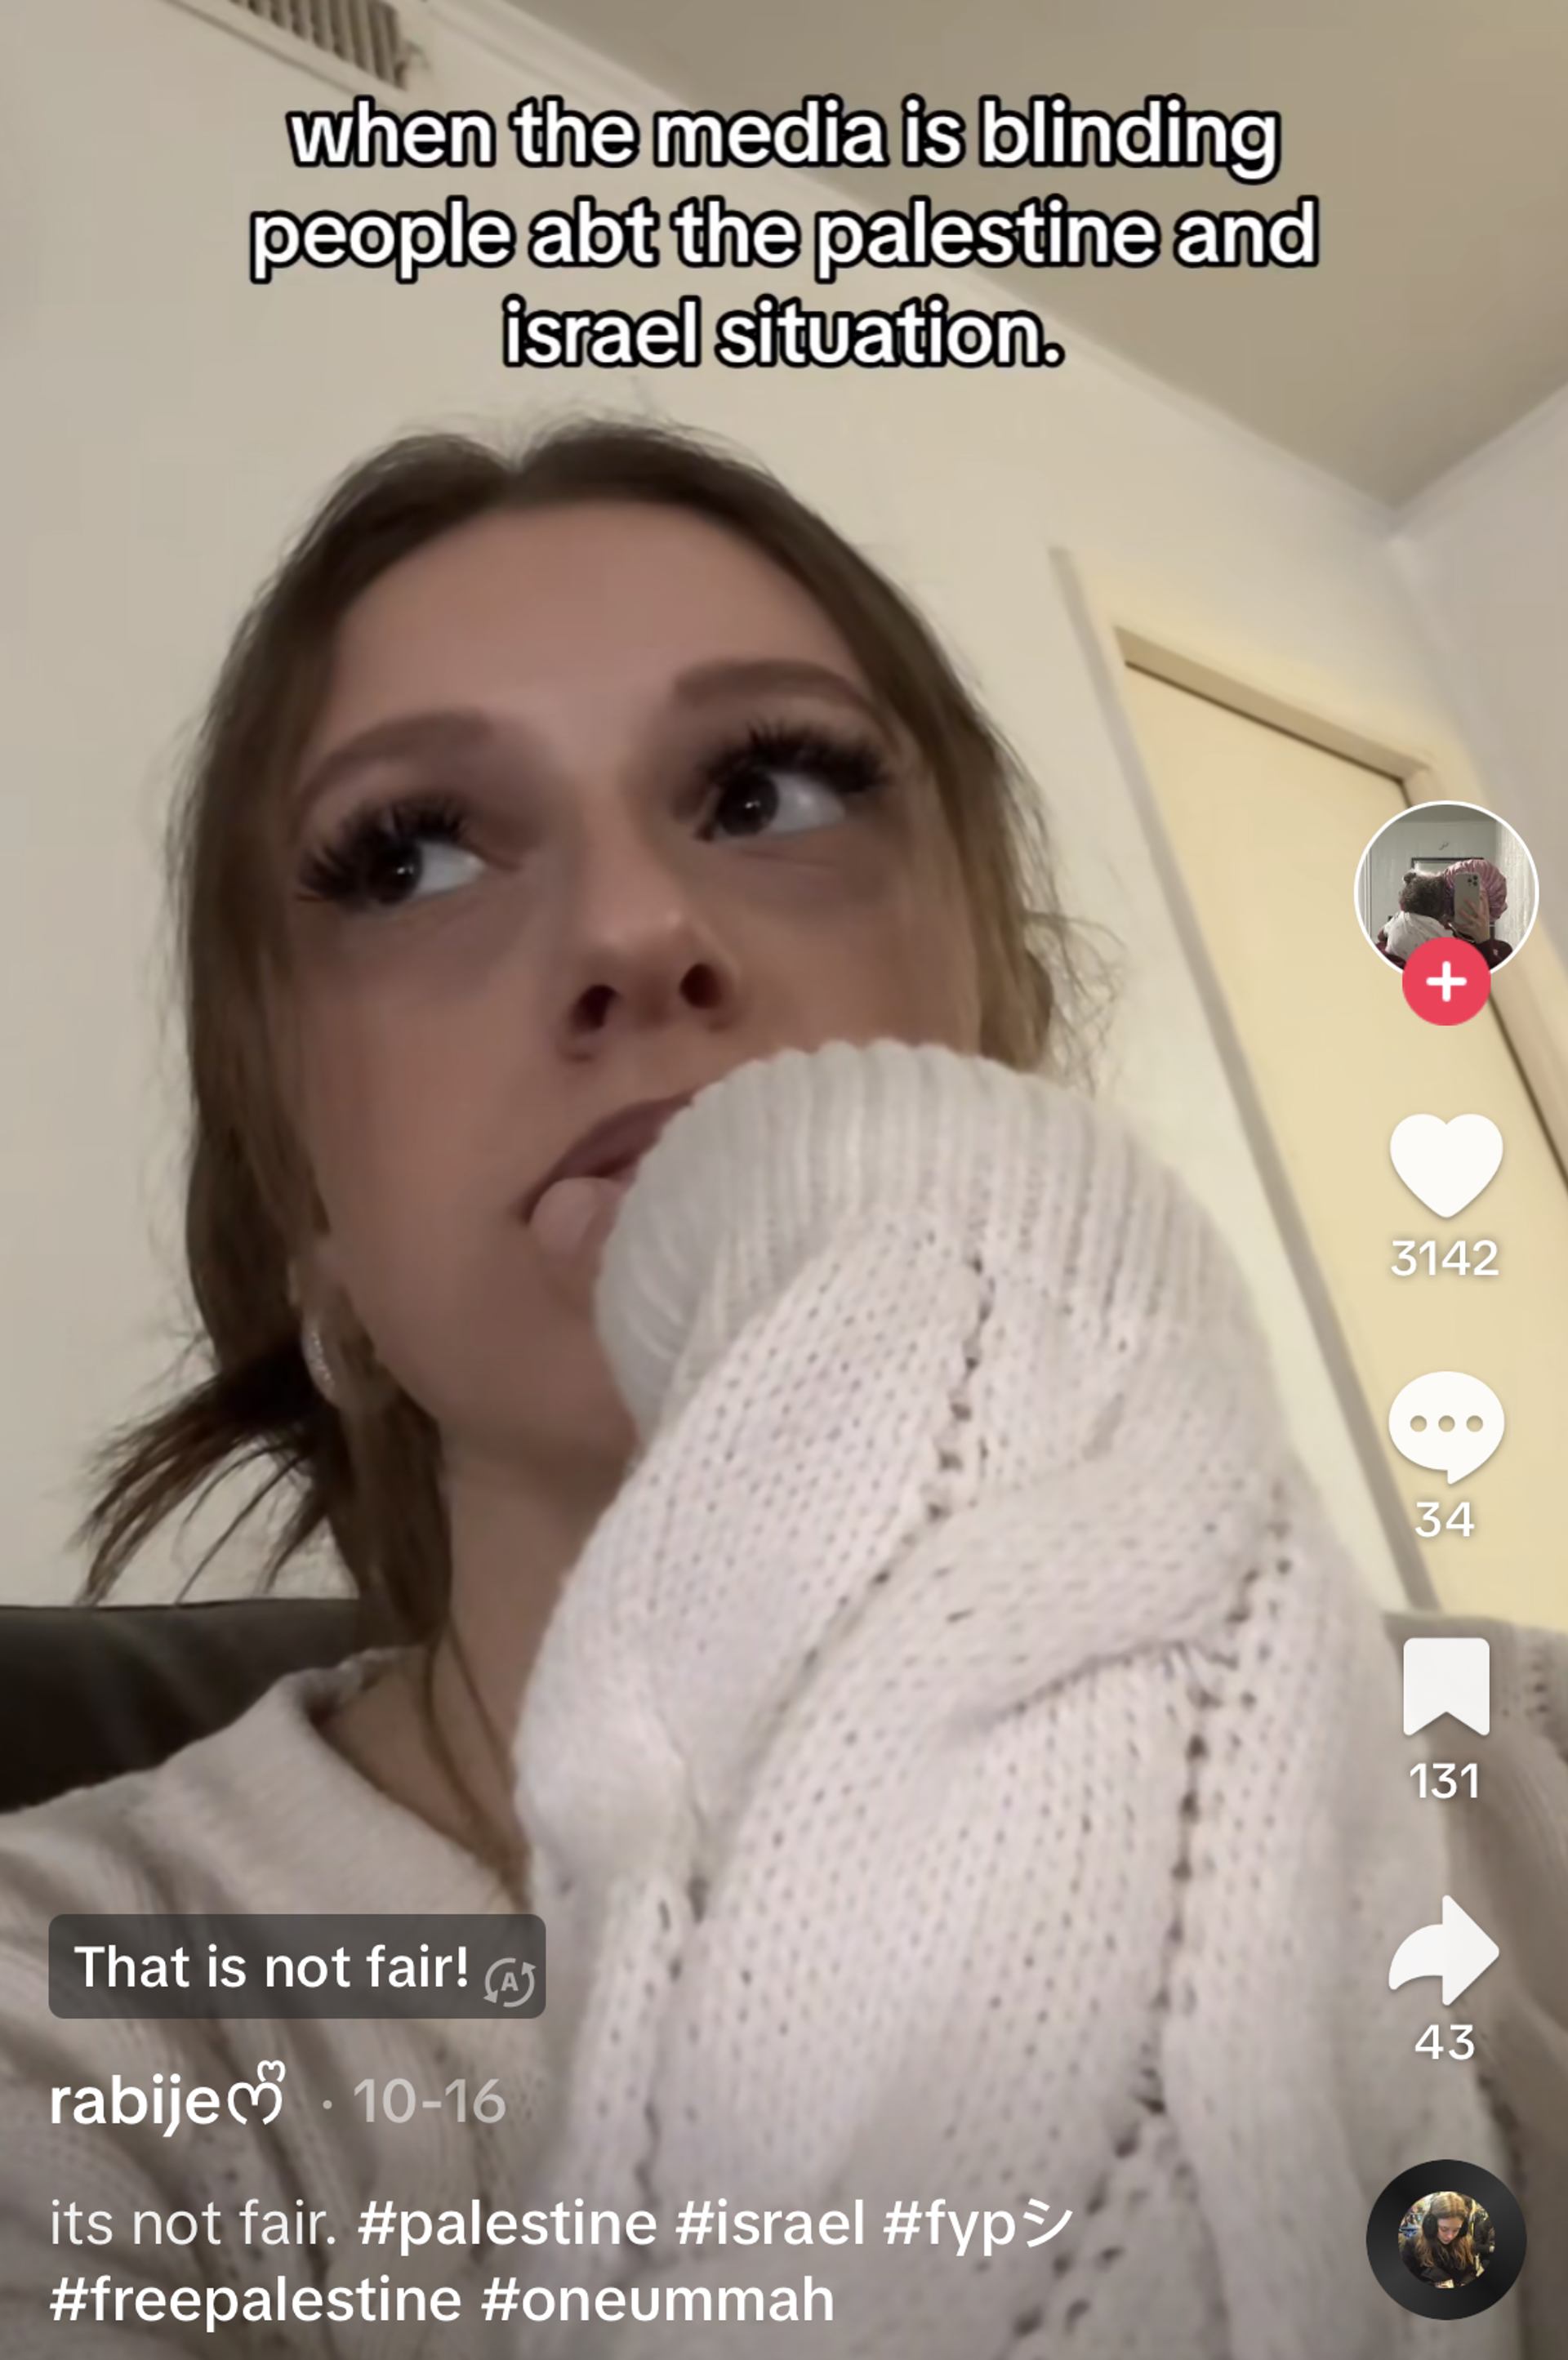 A screenshot of a TikTok with text saying "when the media is blinding peopel abt the palestine and israel situation"